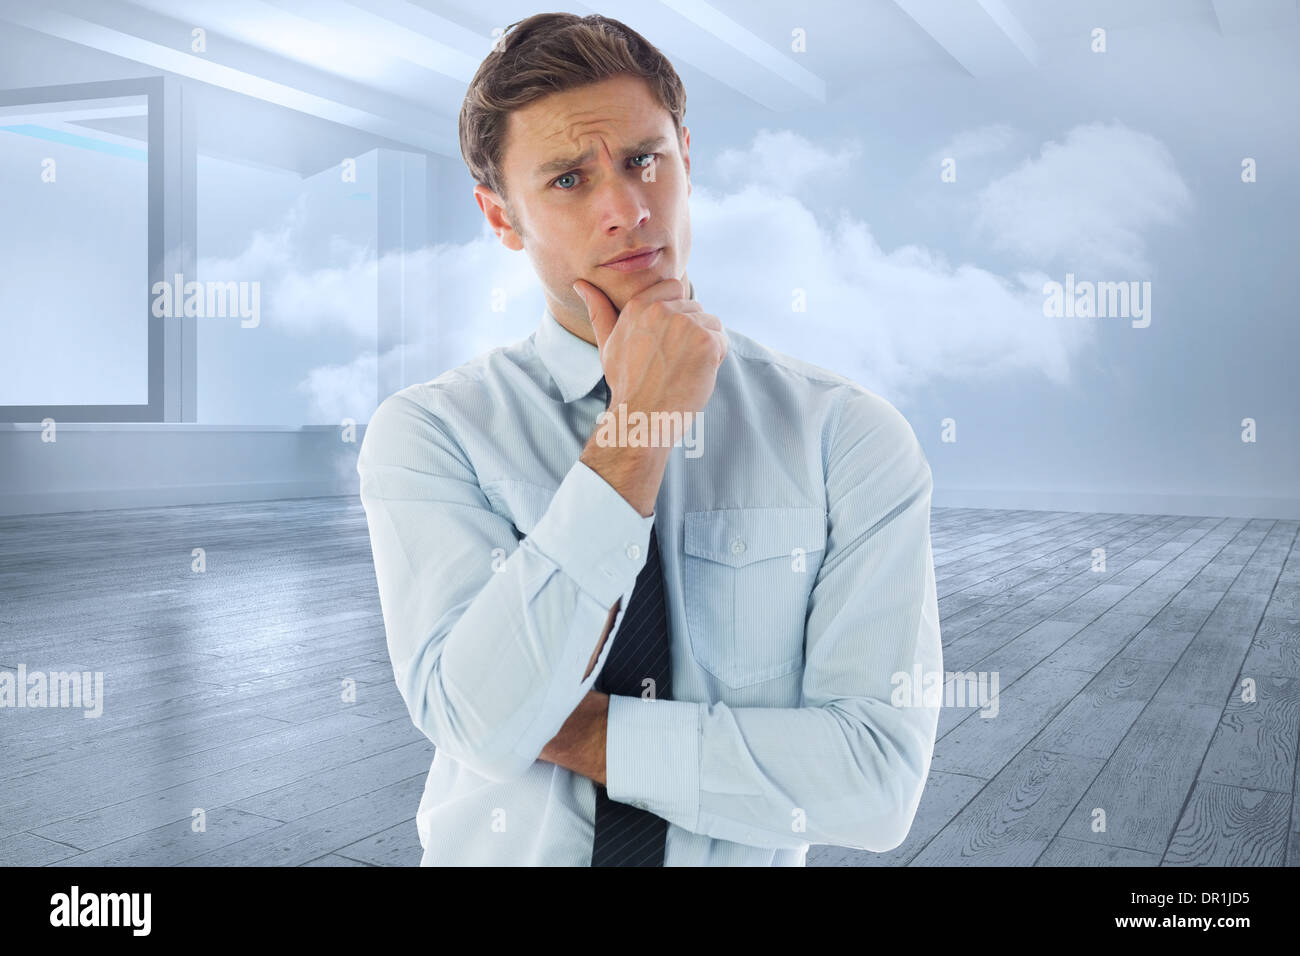 Composite image of thinking businessman with hand on chin Stock Photo